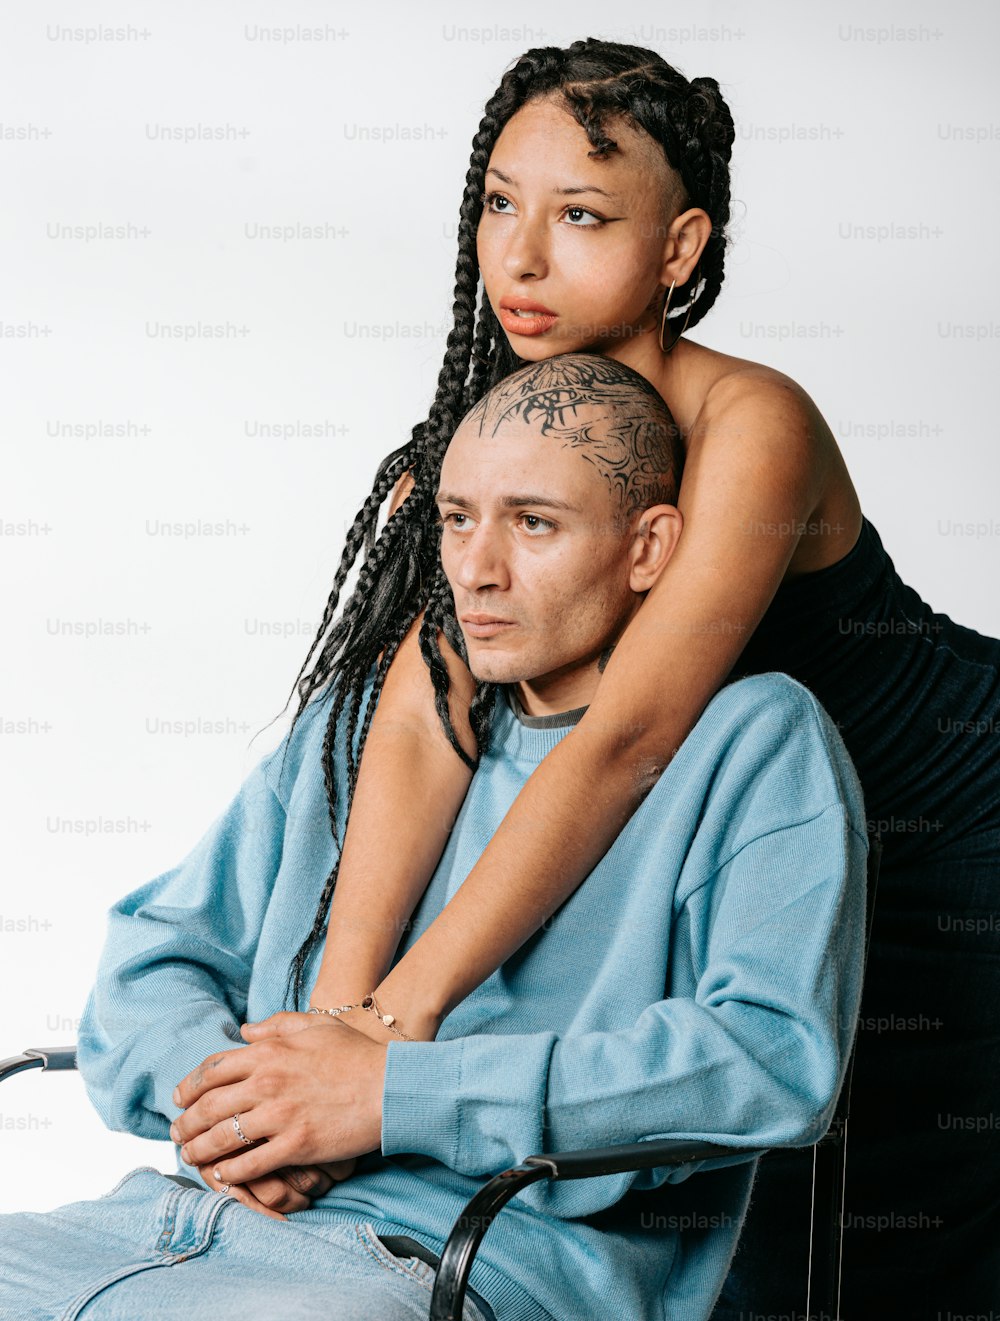 a woman sitting on a man's lap with a bald head